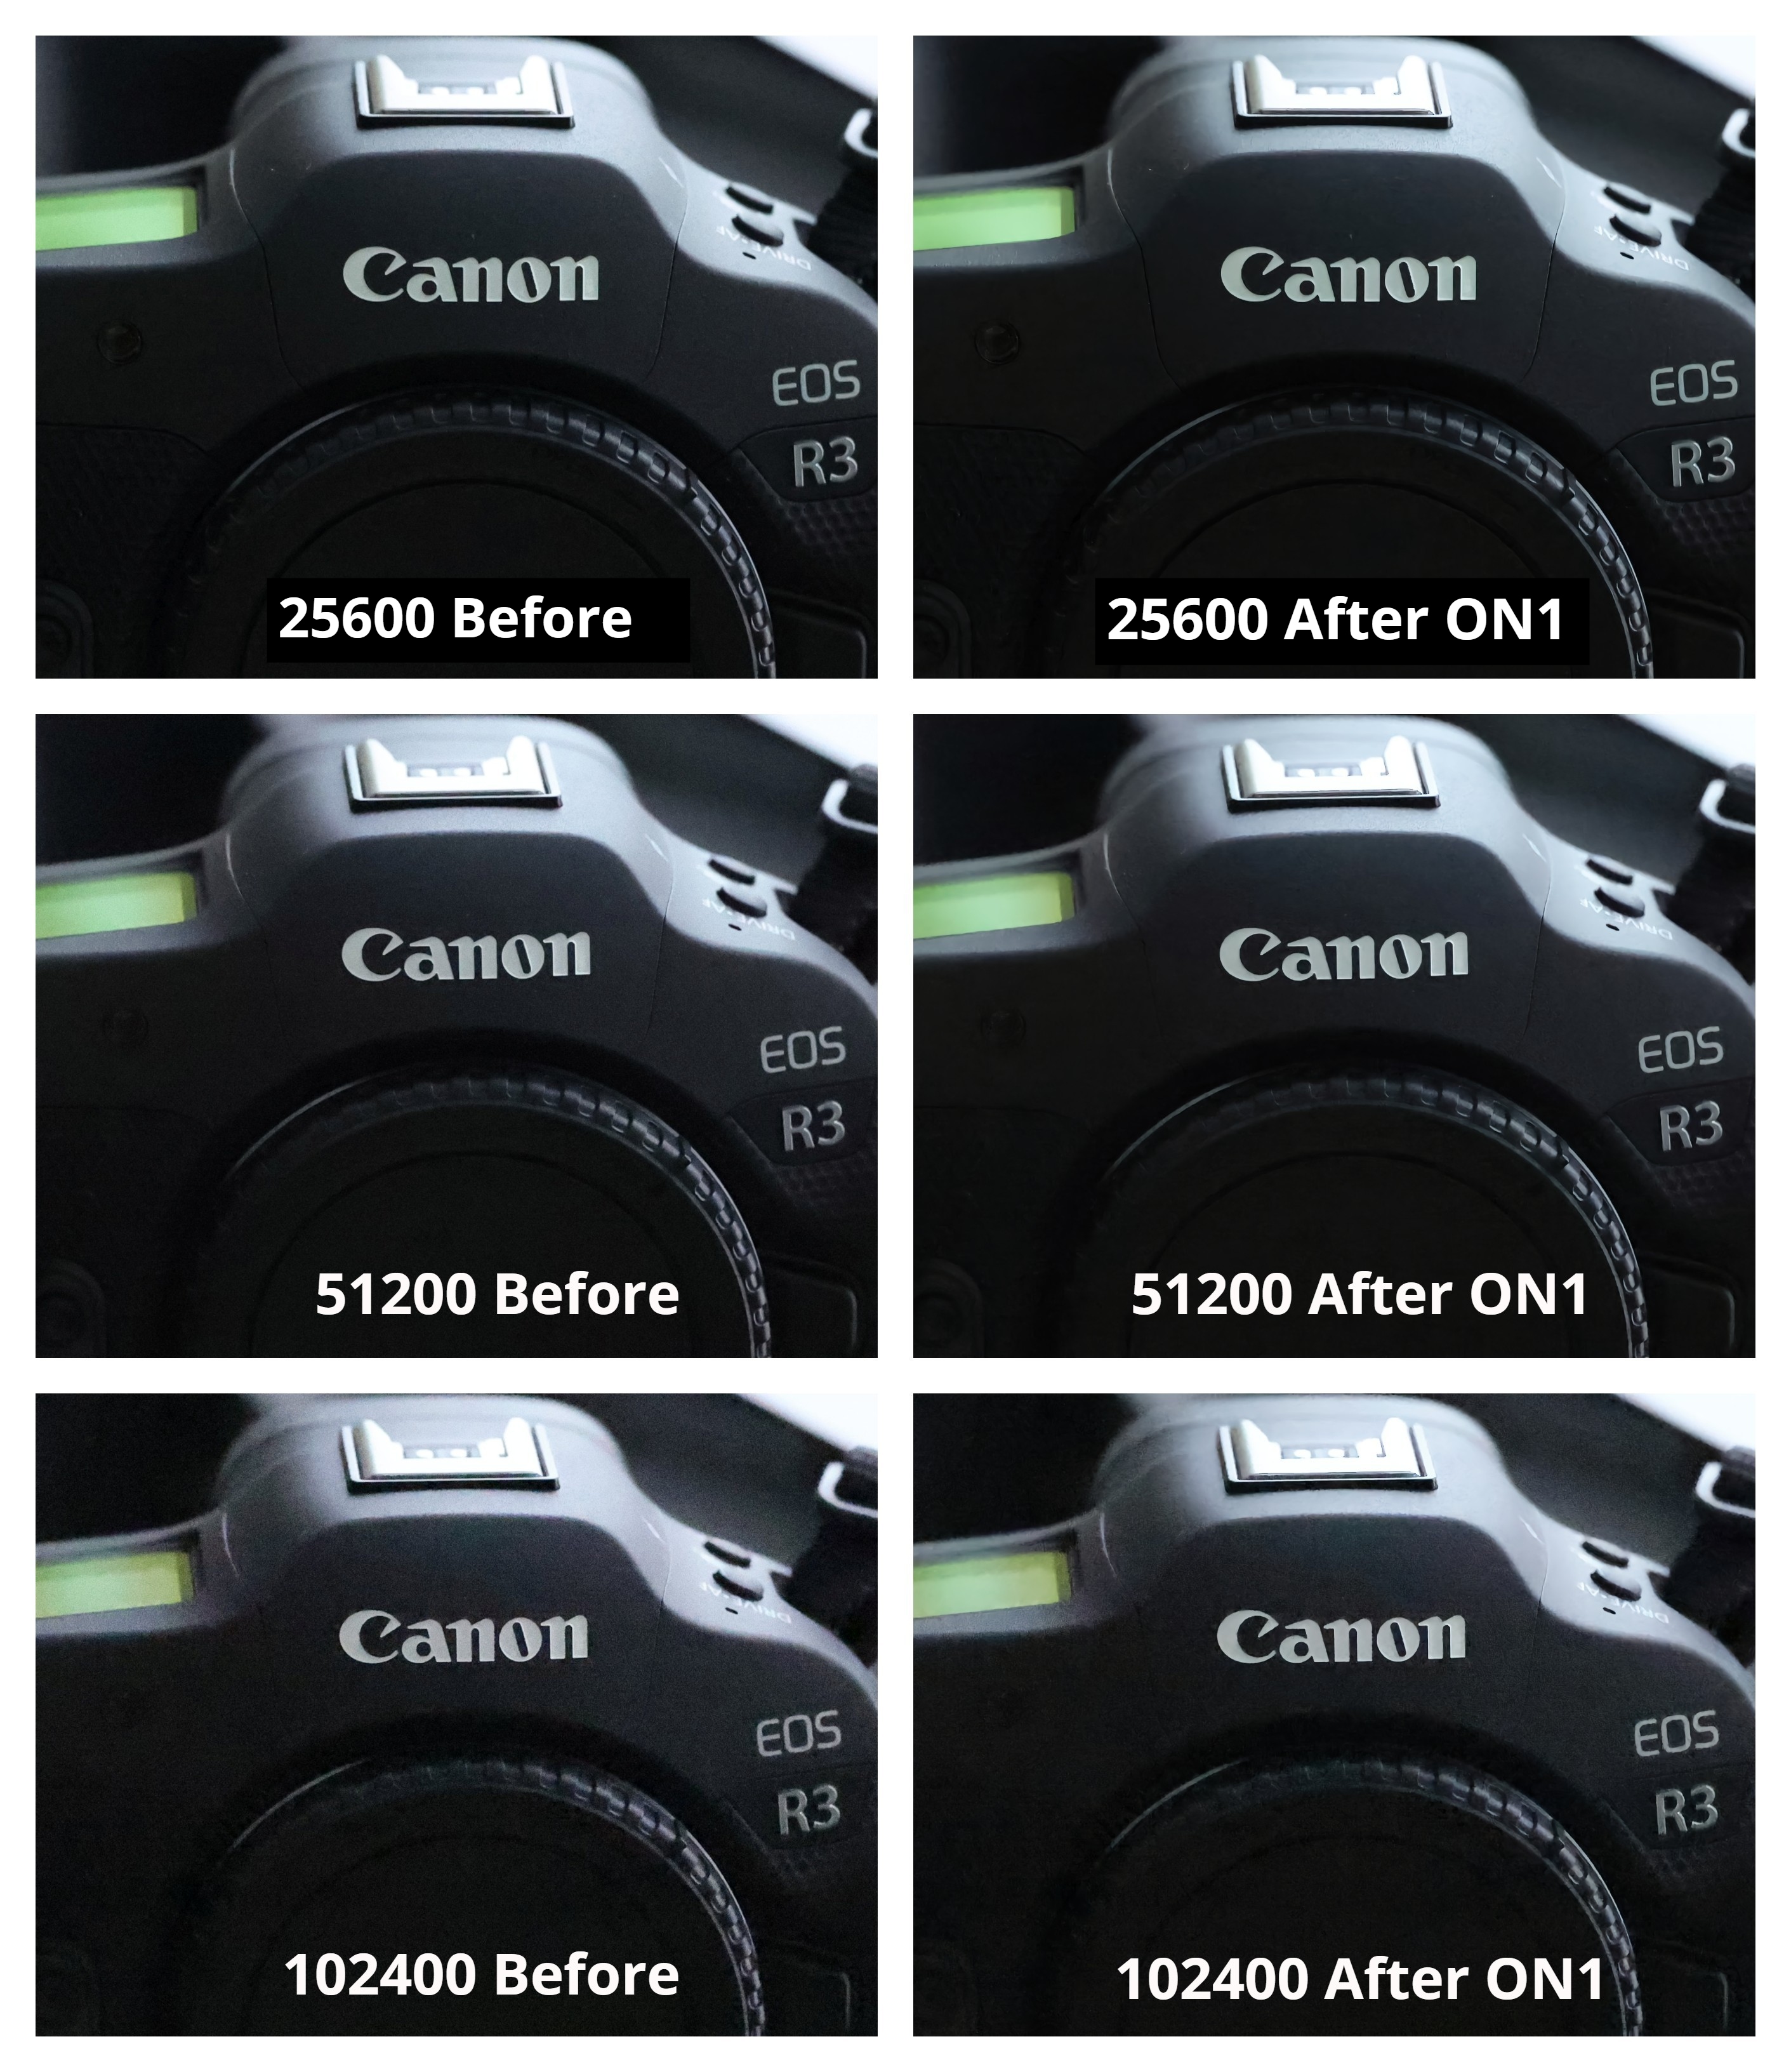 Canon R3 High ISO Test 25600 to 102400 Before and After ON1 No Noise